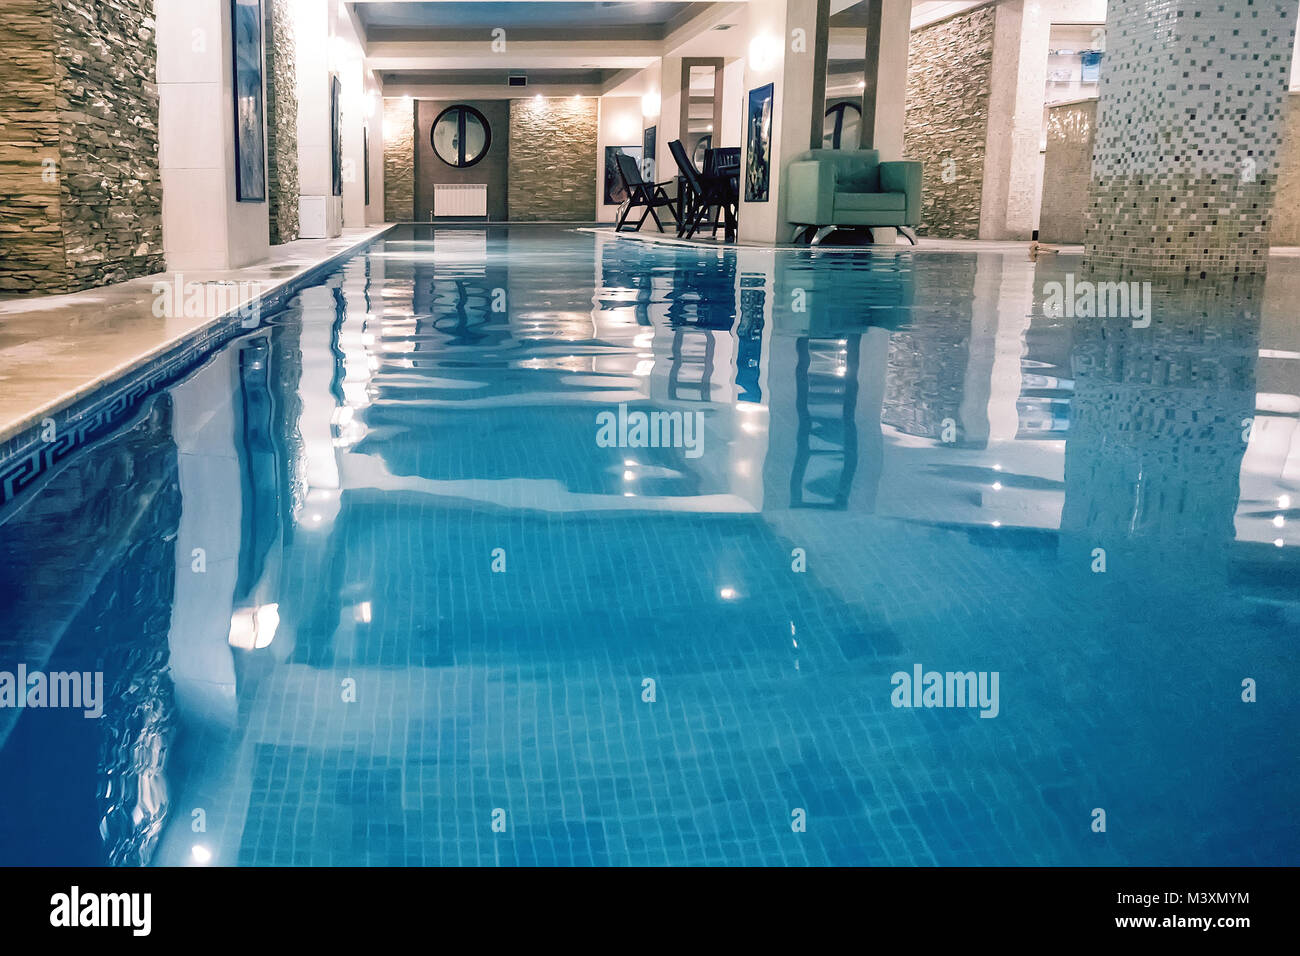 Indoor swimming poo on resort. Spa and Wellness centre with swimming pool, bath, sauna, and restaurant inside. Swimming pool with blue clear transpare Stock Photo